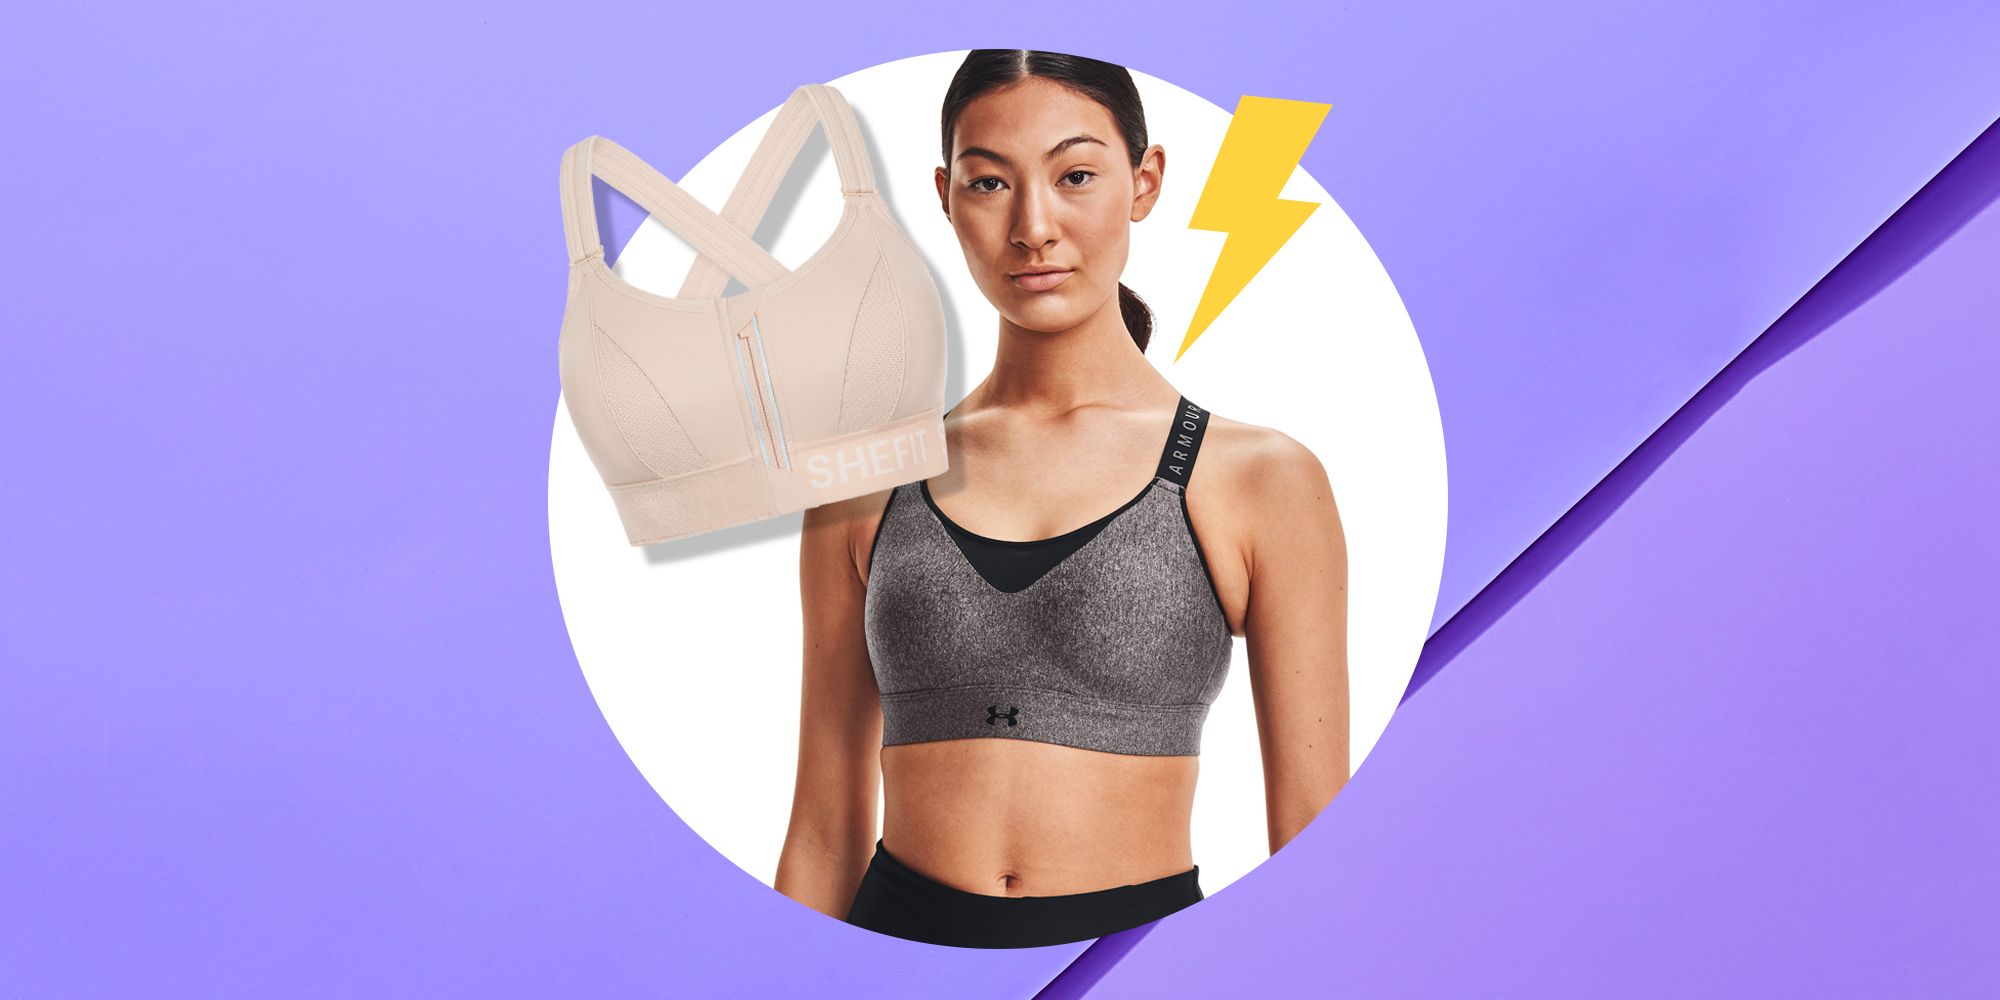 Sports Bra For Women High Impact No Bounce Non Wi Large Busts Gym Exercise Yoga Running Athletic Workout Sportswear With Bra Extender